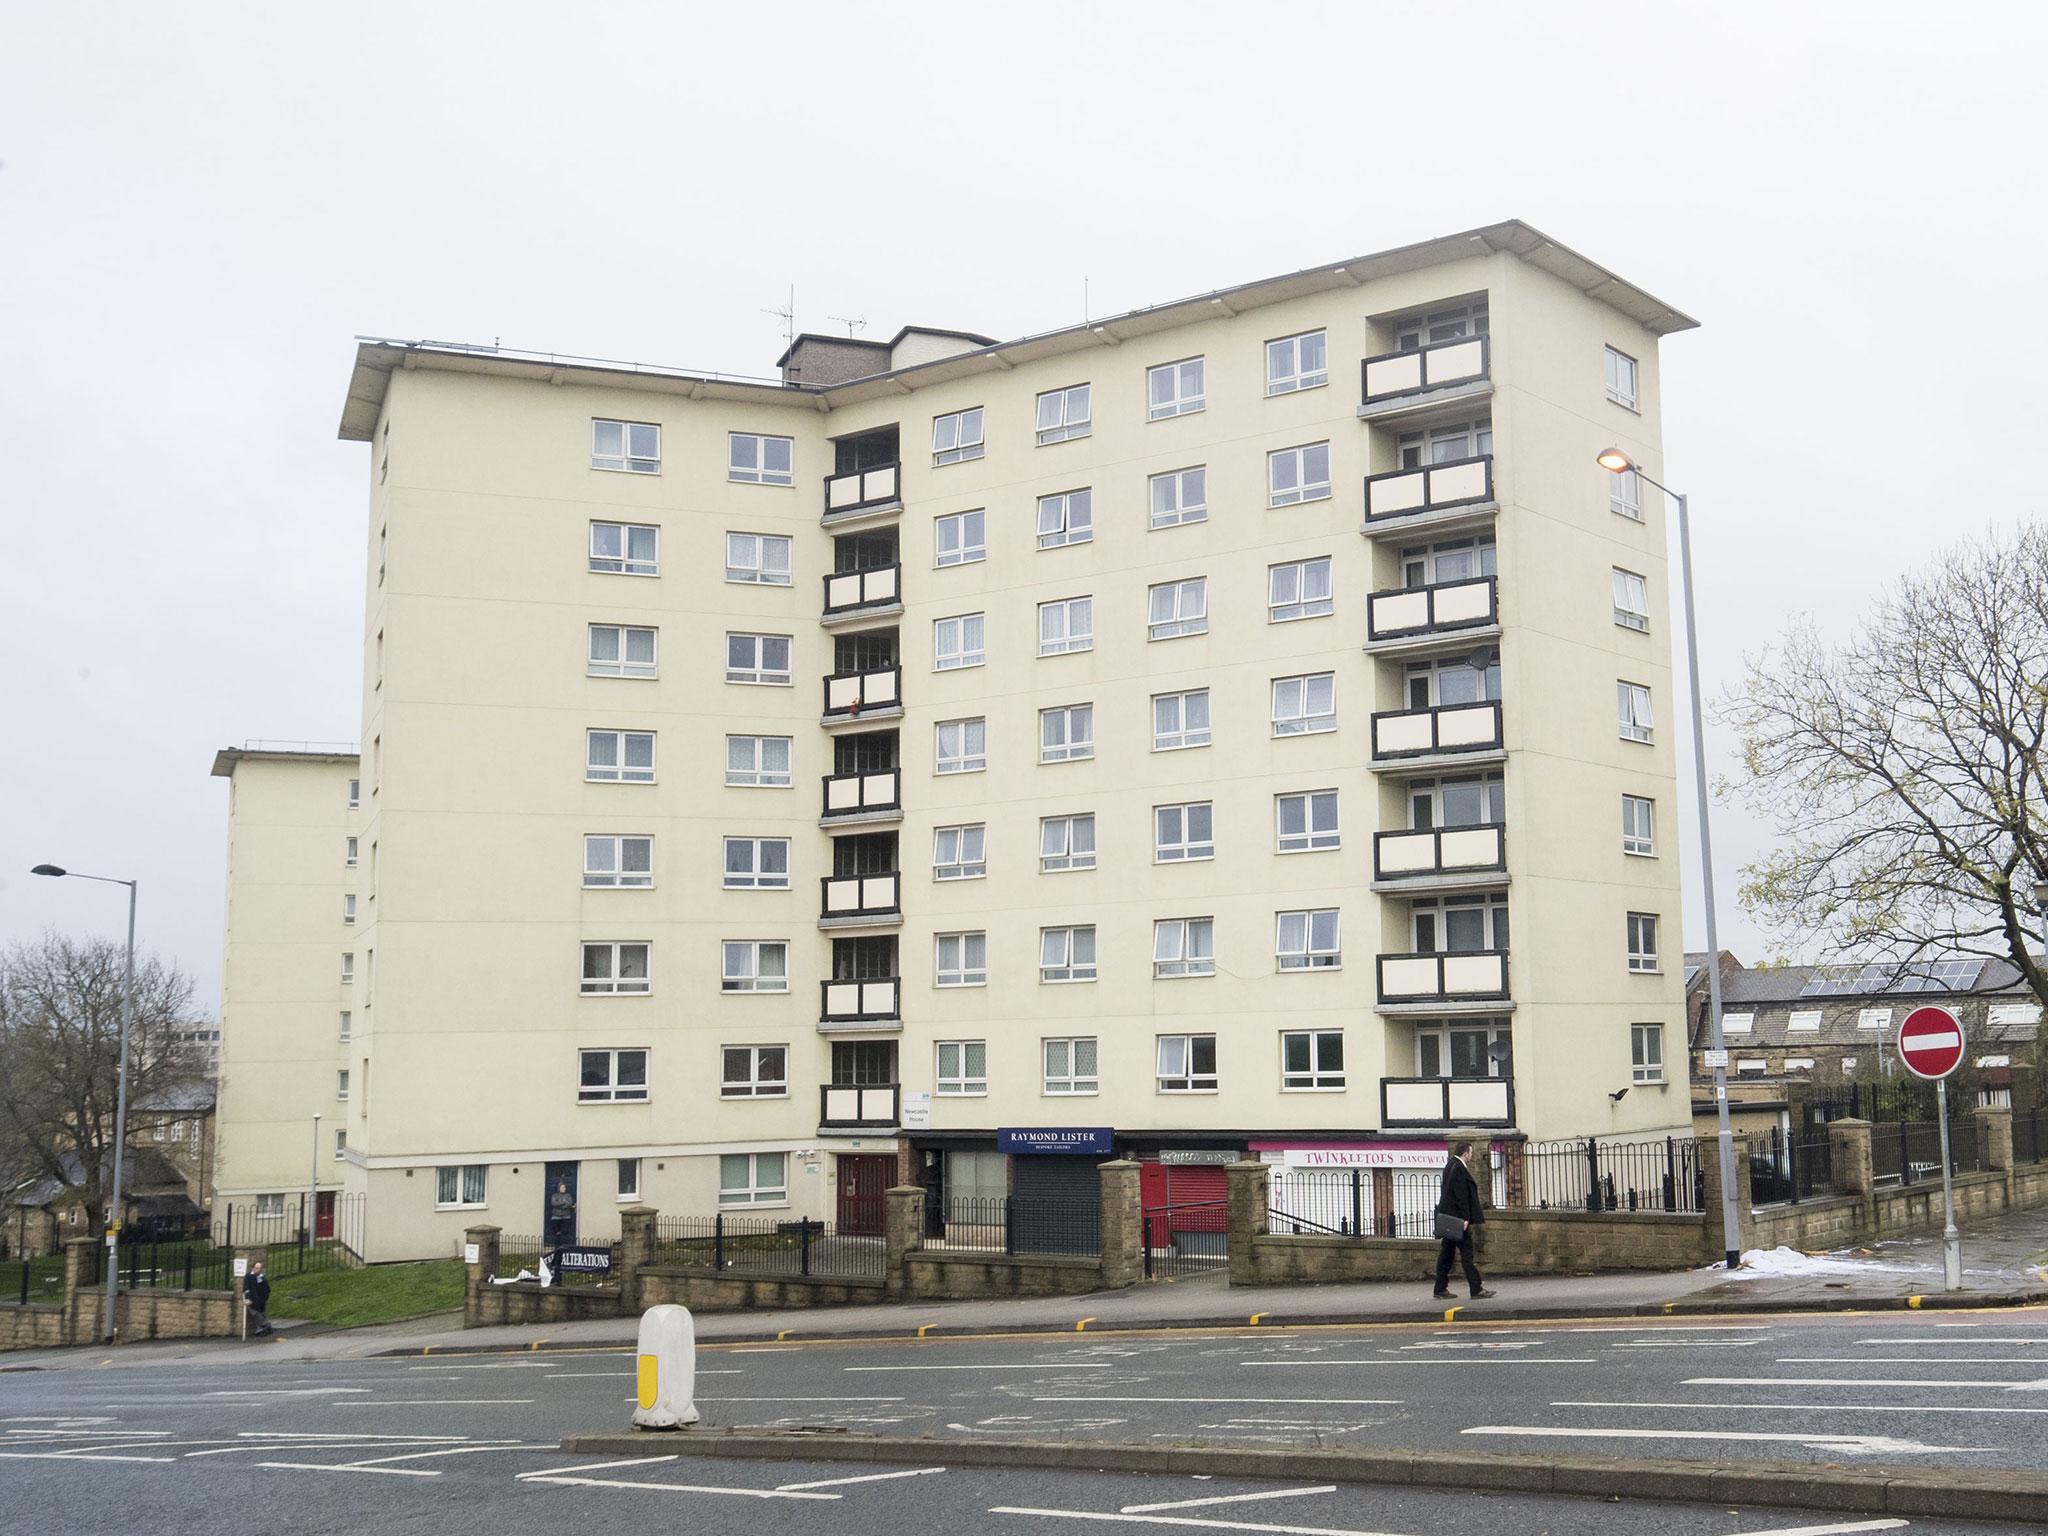 Newcastle House in Bradford, where 18-month-old Elliot Proctor died after falling from a sixth-floor window